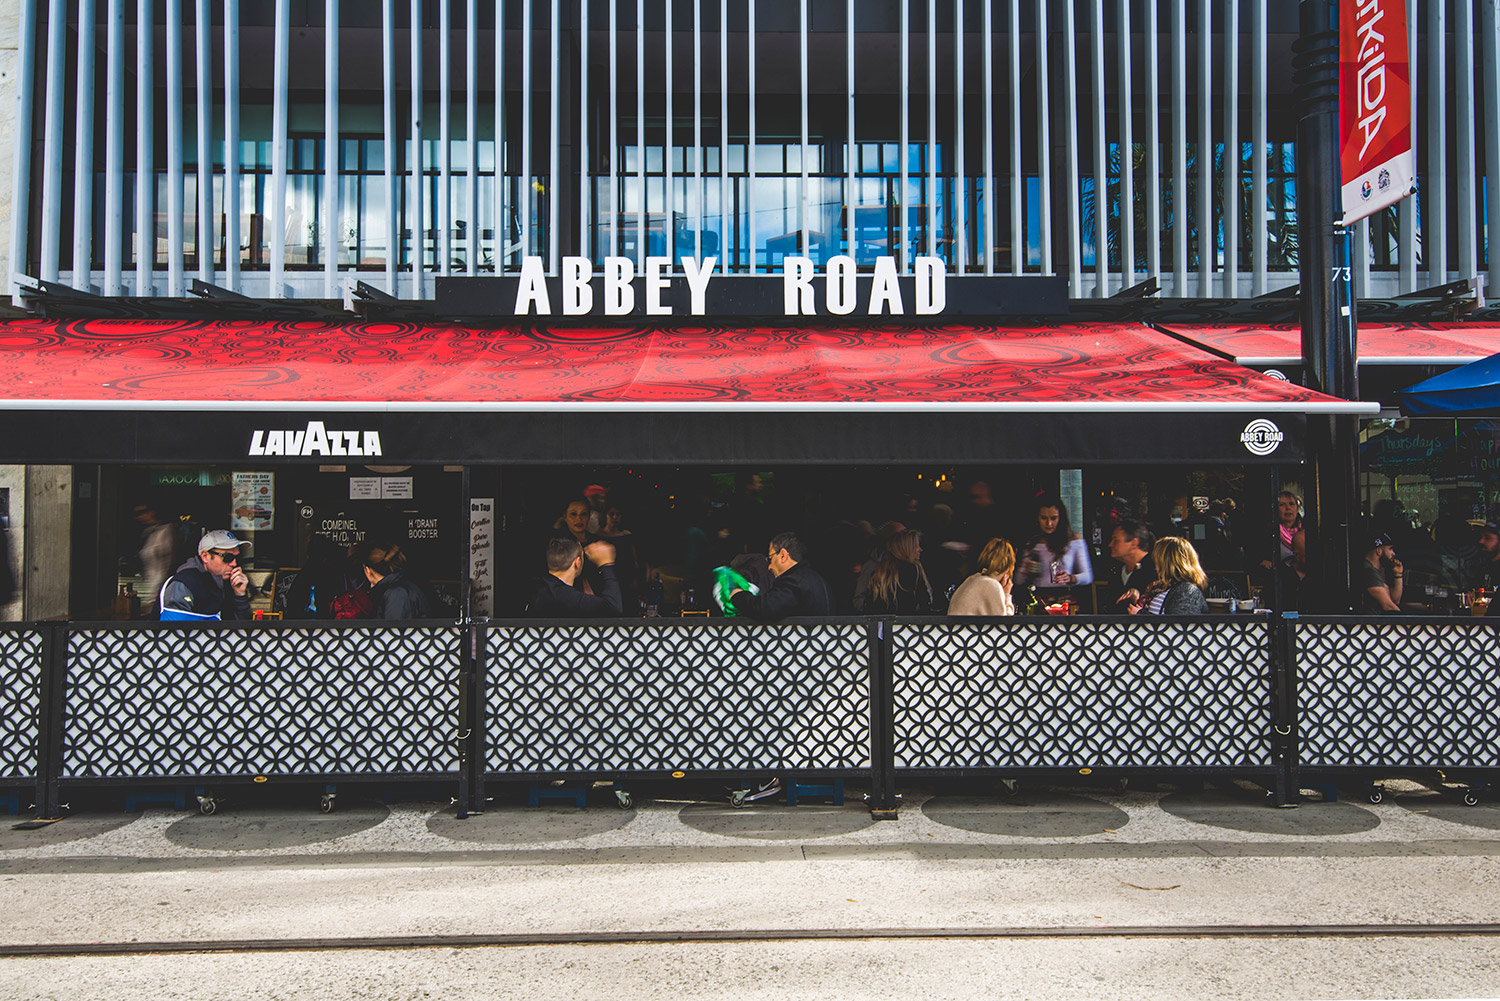 Abbey Road Cafe